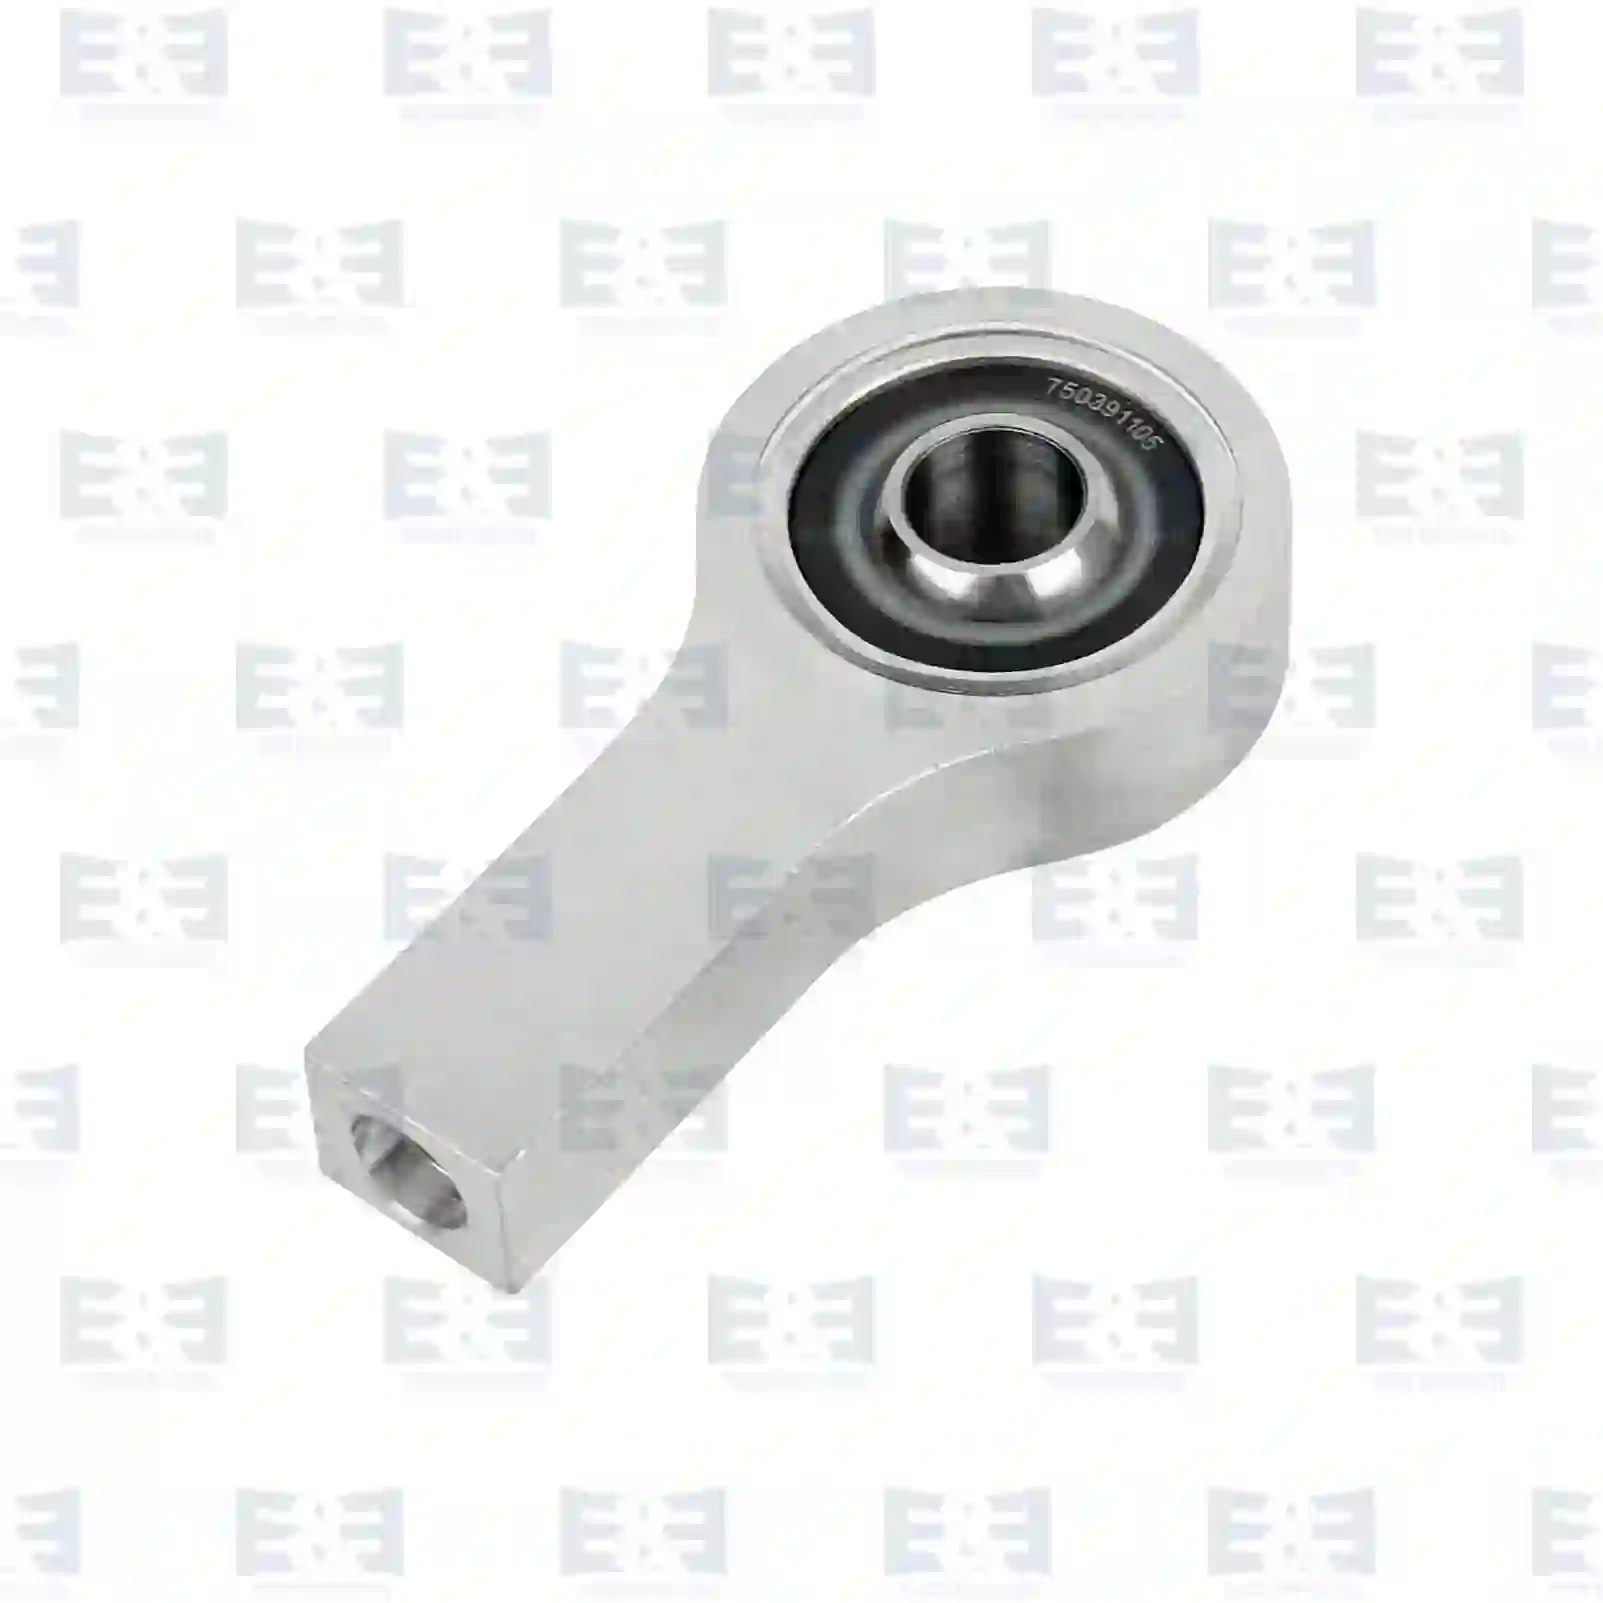 Bearing joint, cabin shock absorber, 2E2275140, 1743466, , , ||  2E2275140 E&E Truck Spare Parts | Truck Spare Parts, Auotomotive Spare Parts Bearing joint, cabin shock absorber, 2E2275140, 1743466, , , ||  2E2275140 E&E Truck Spare Parts | Truck Spare Parts, Auotomotive Spare Parts